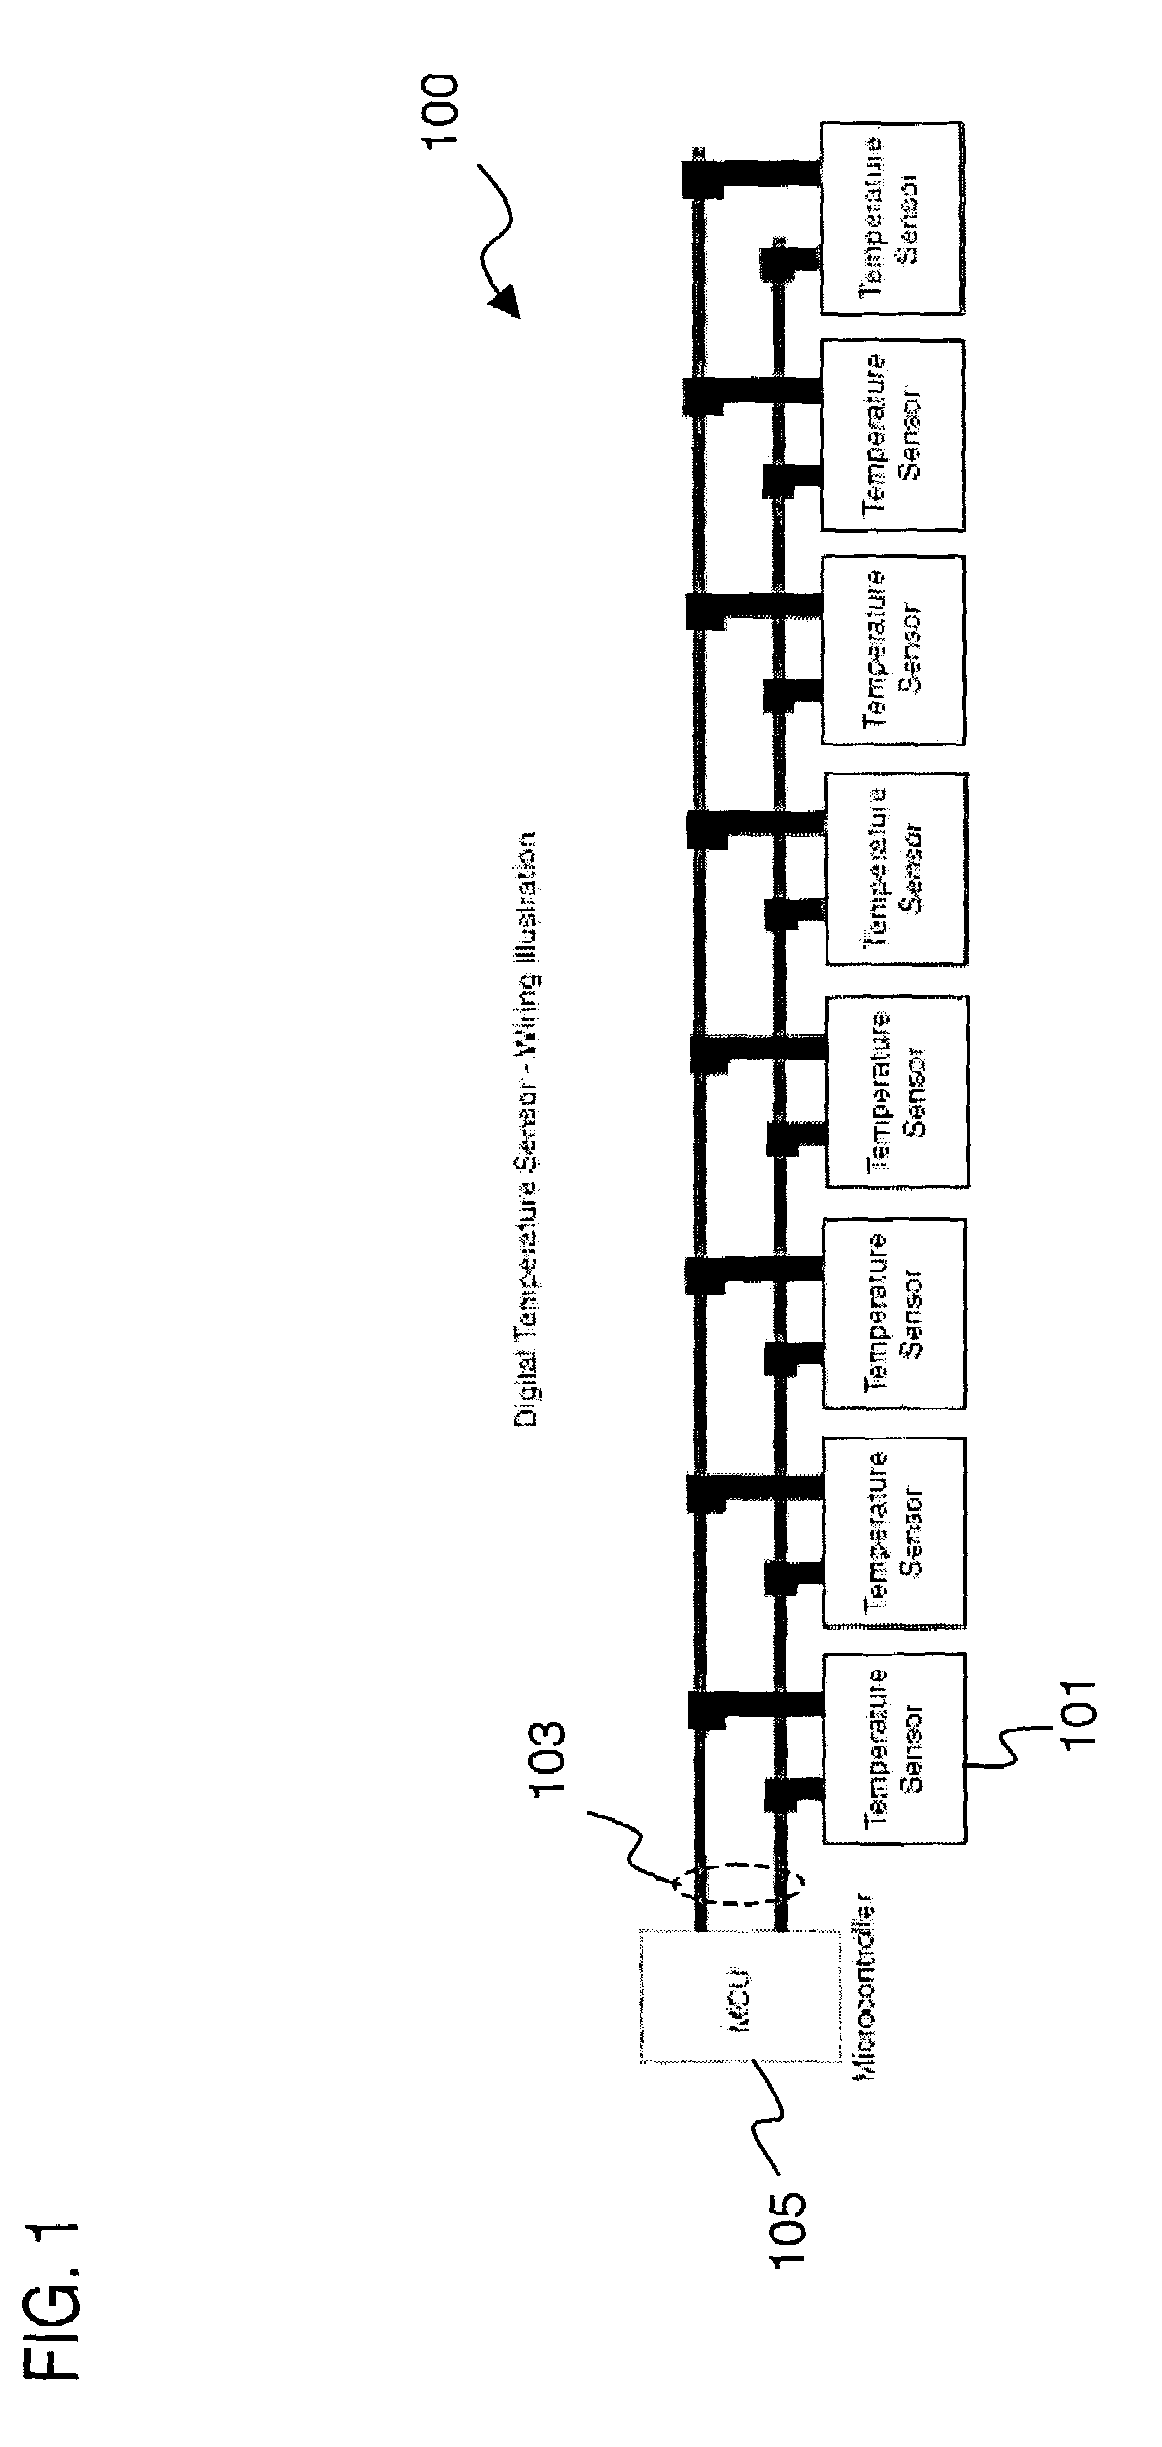 System and method for temperature sensing and monitoring